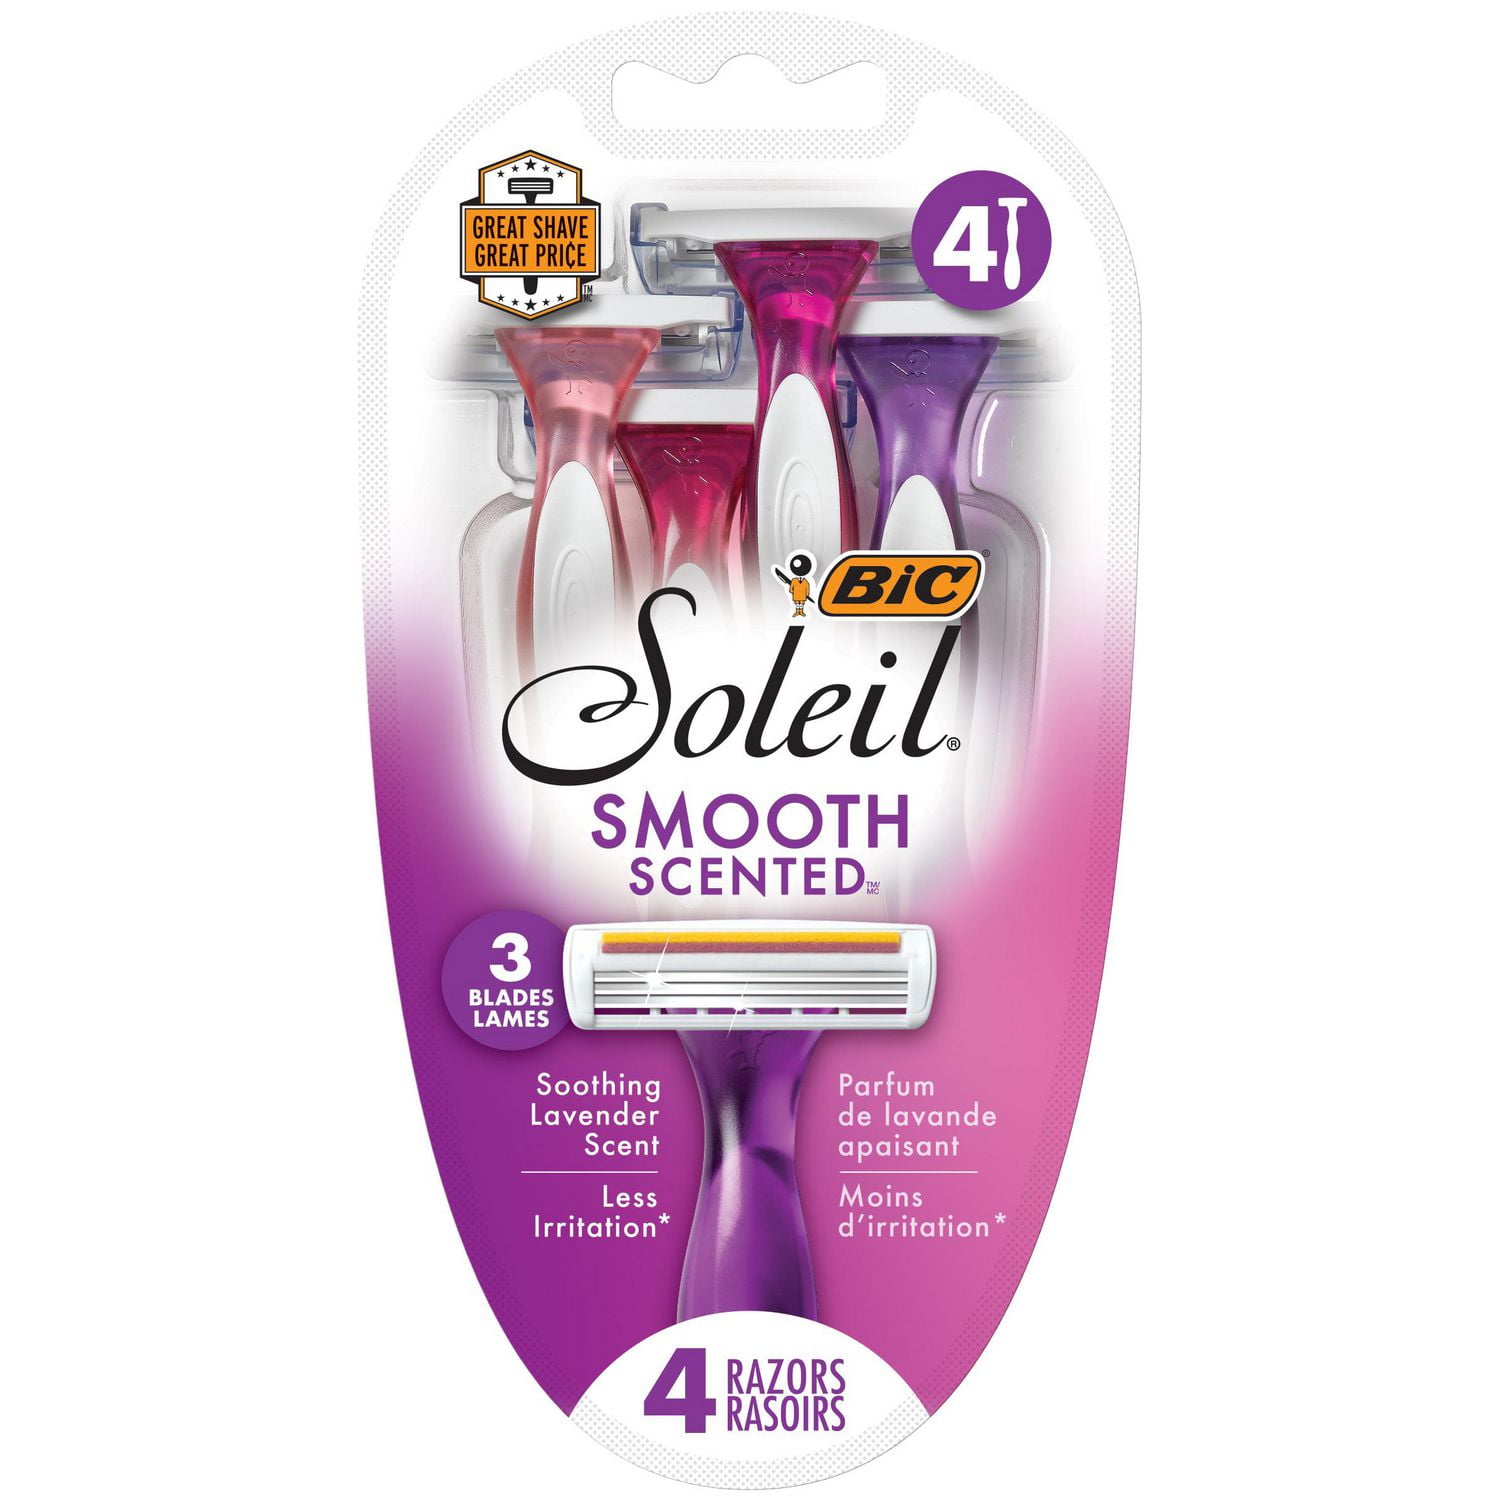 BIC Soleil Smooth Scented Women's Disposable Razor, 3 Blades with a  Moisture Strip For a Silky Shave, Assorted, 4 Piece Razor Set, 4 Pack 